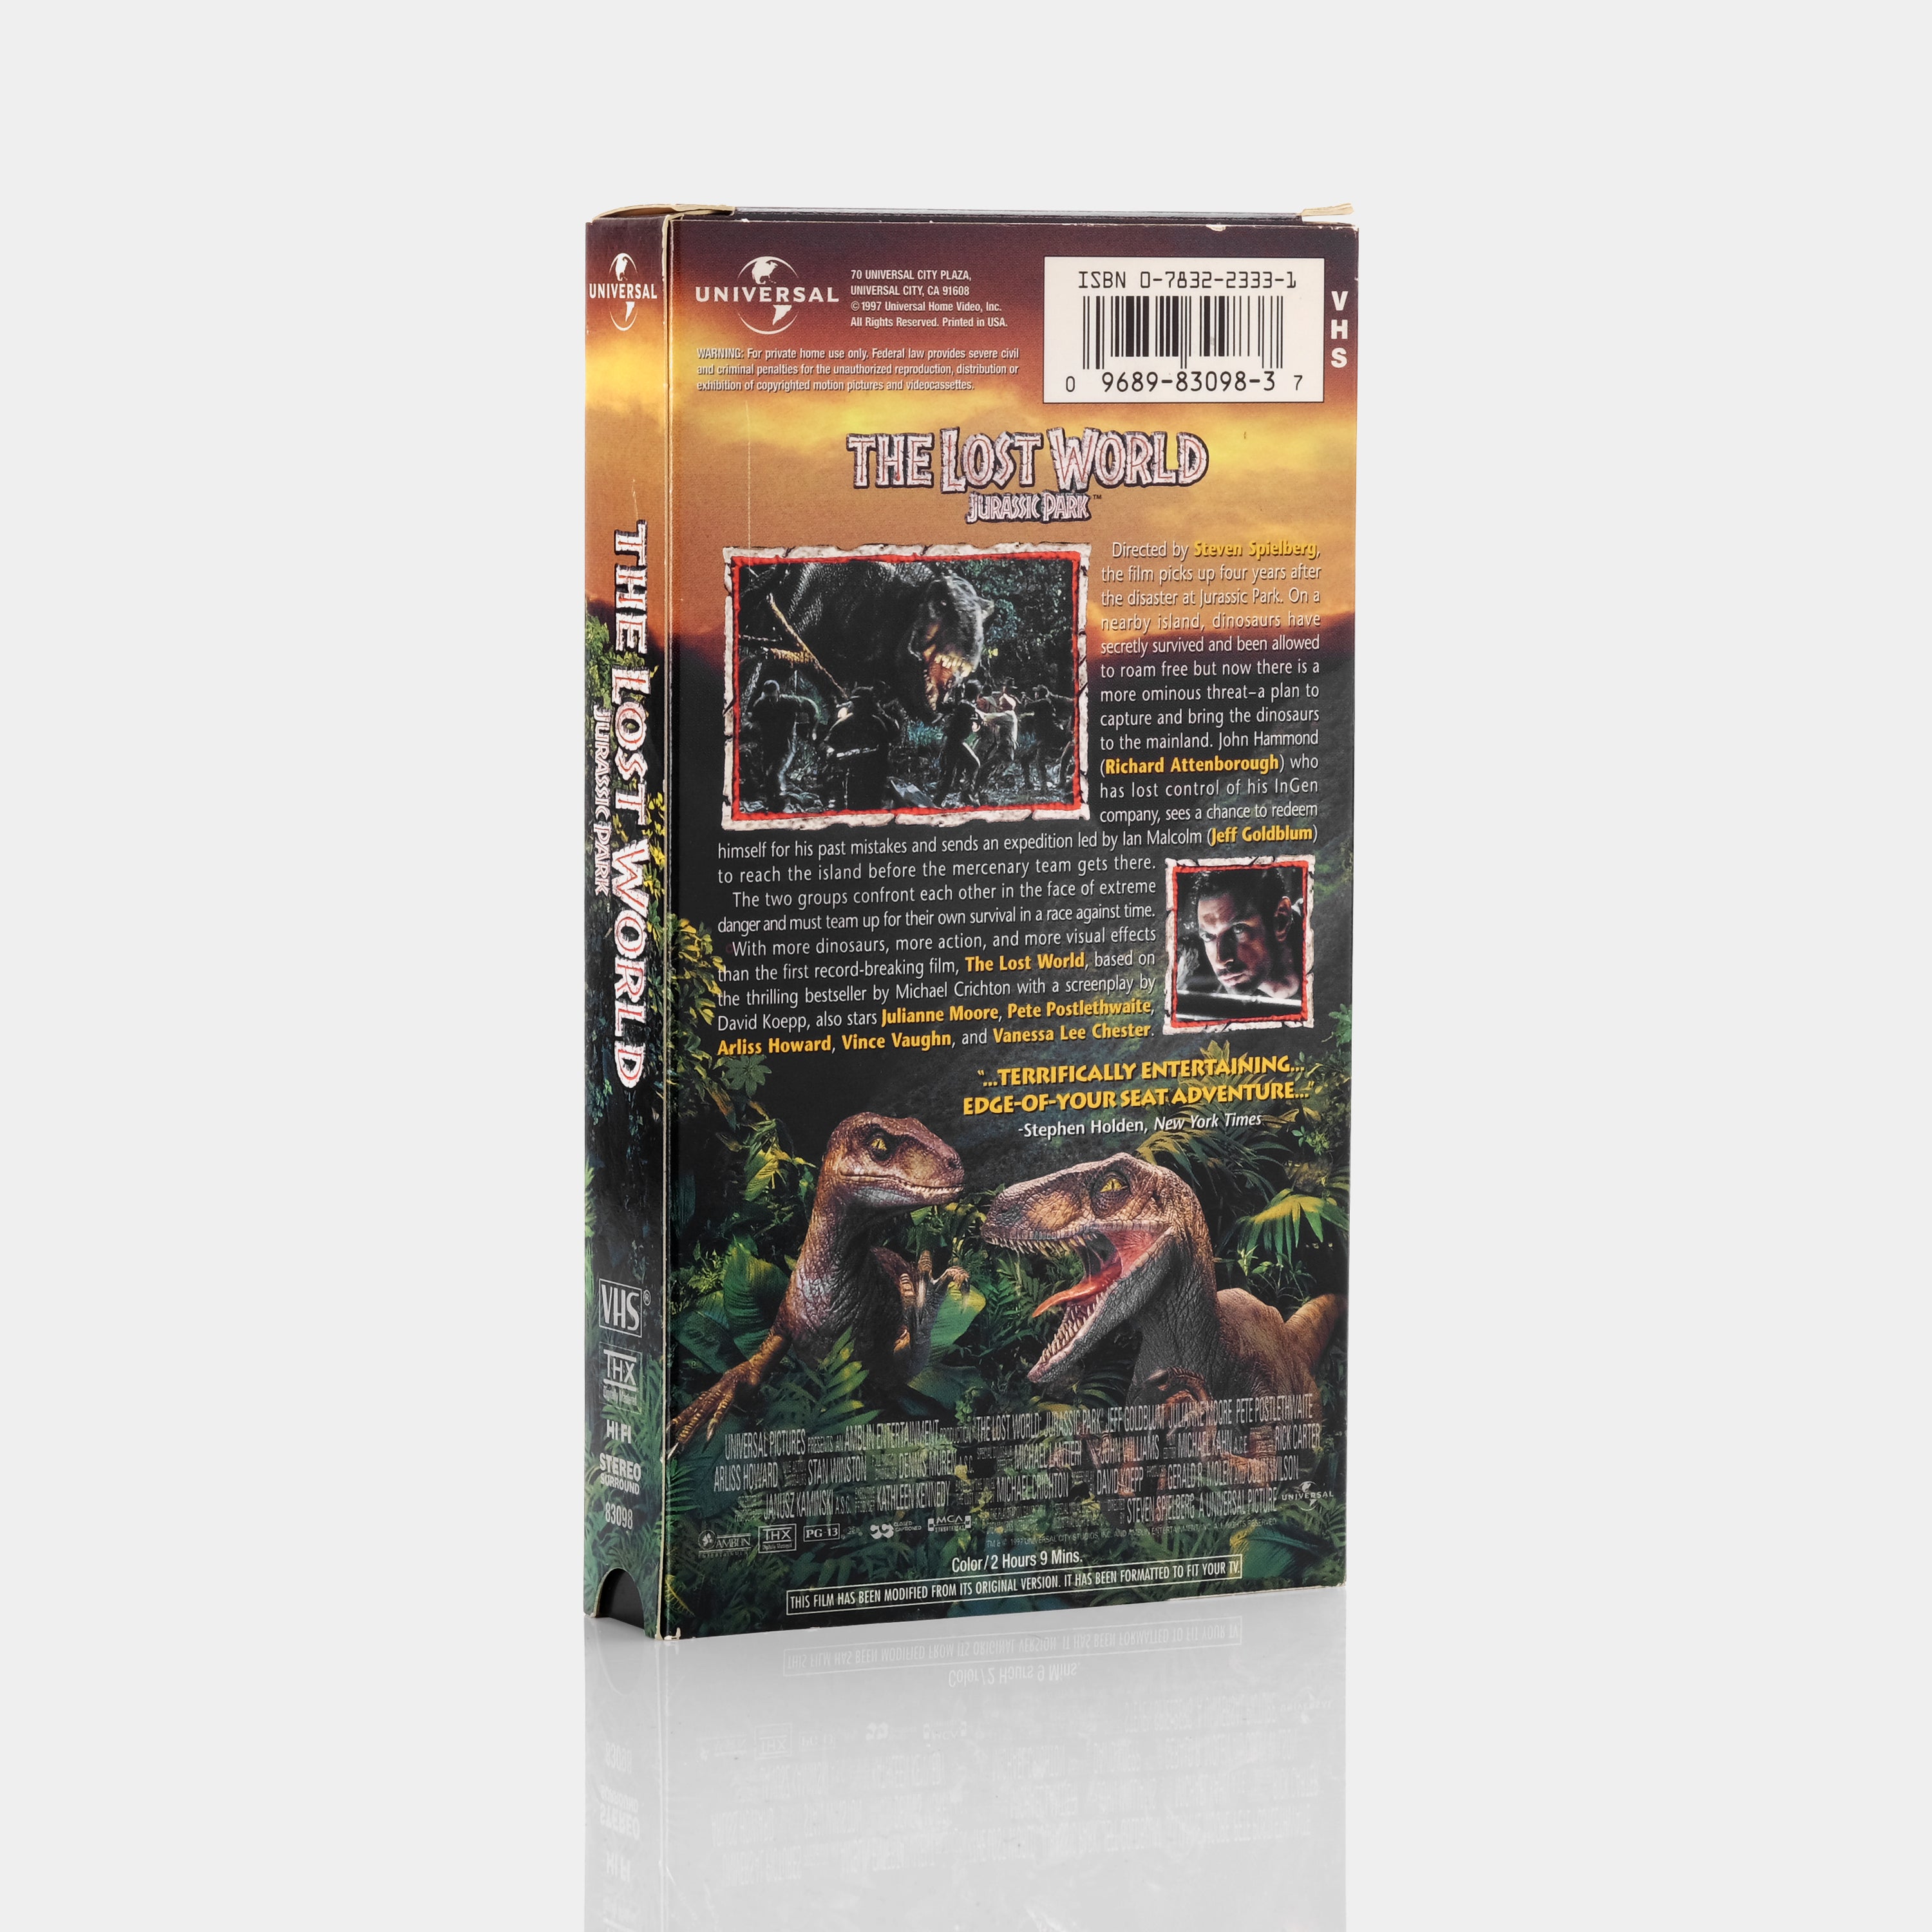 The Lost World: Jurassic Park VHS Tape